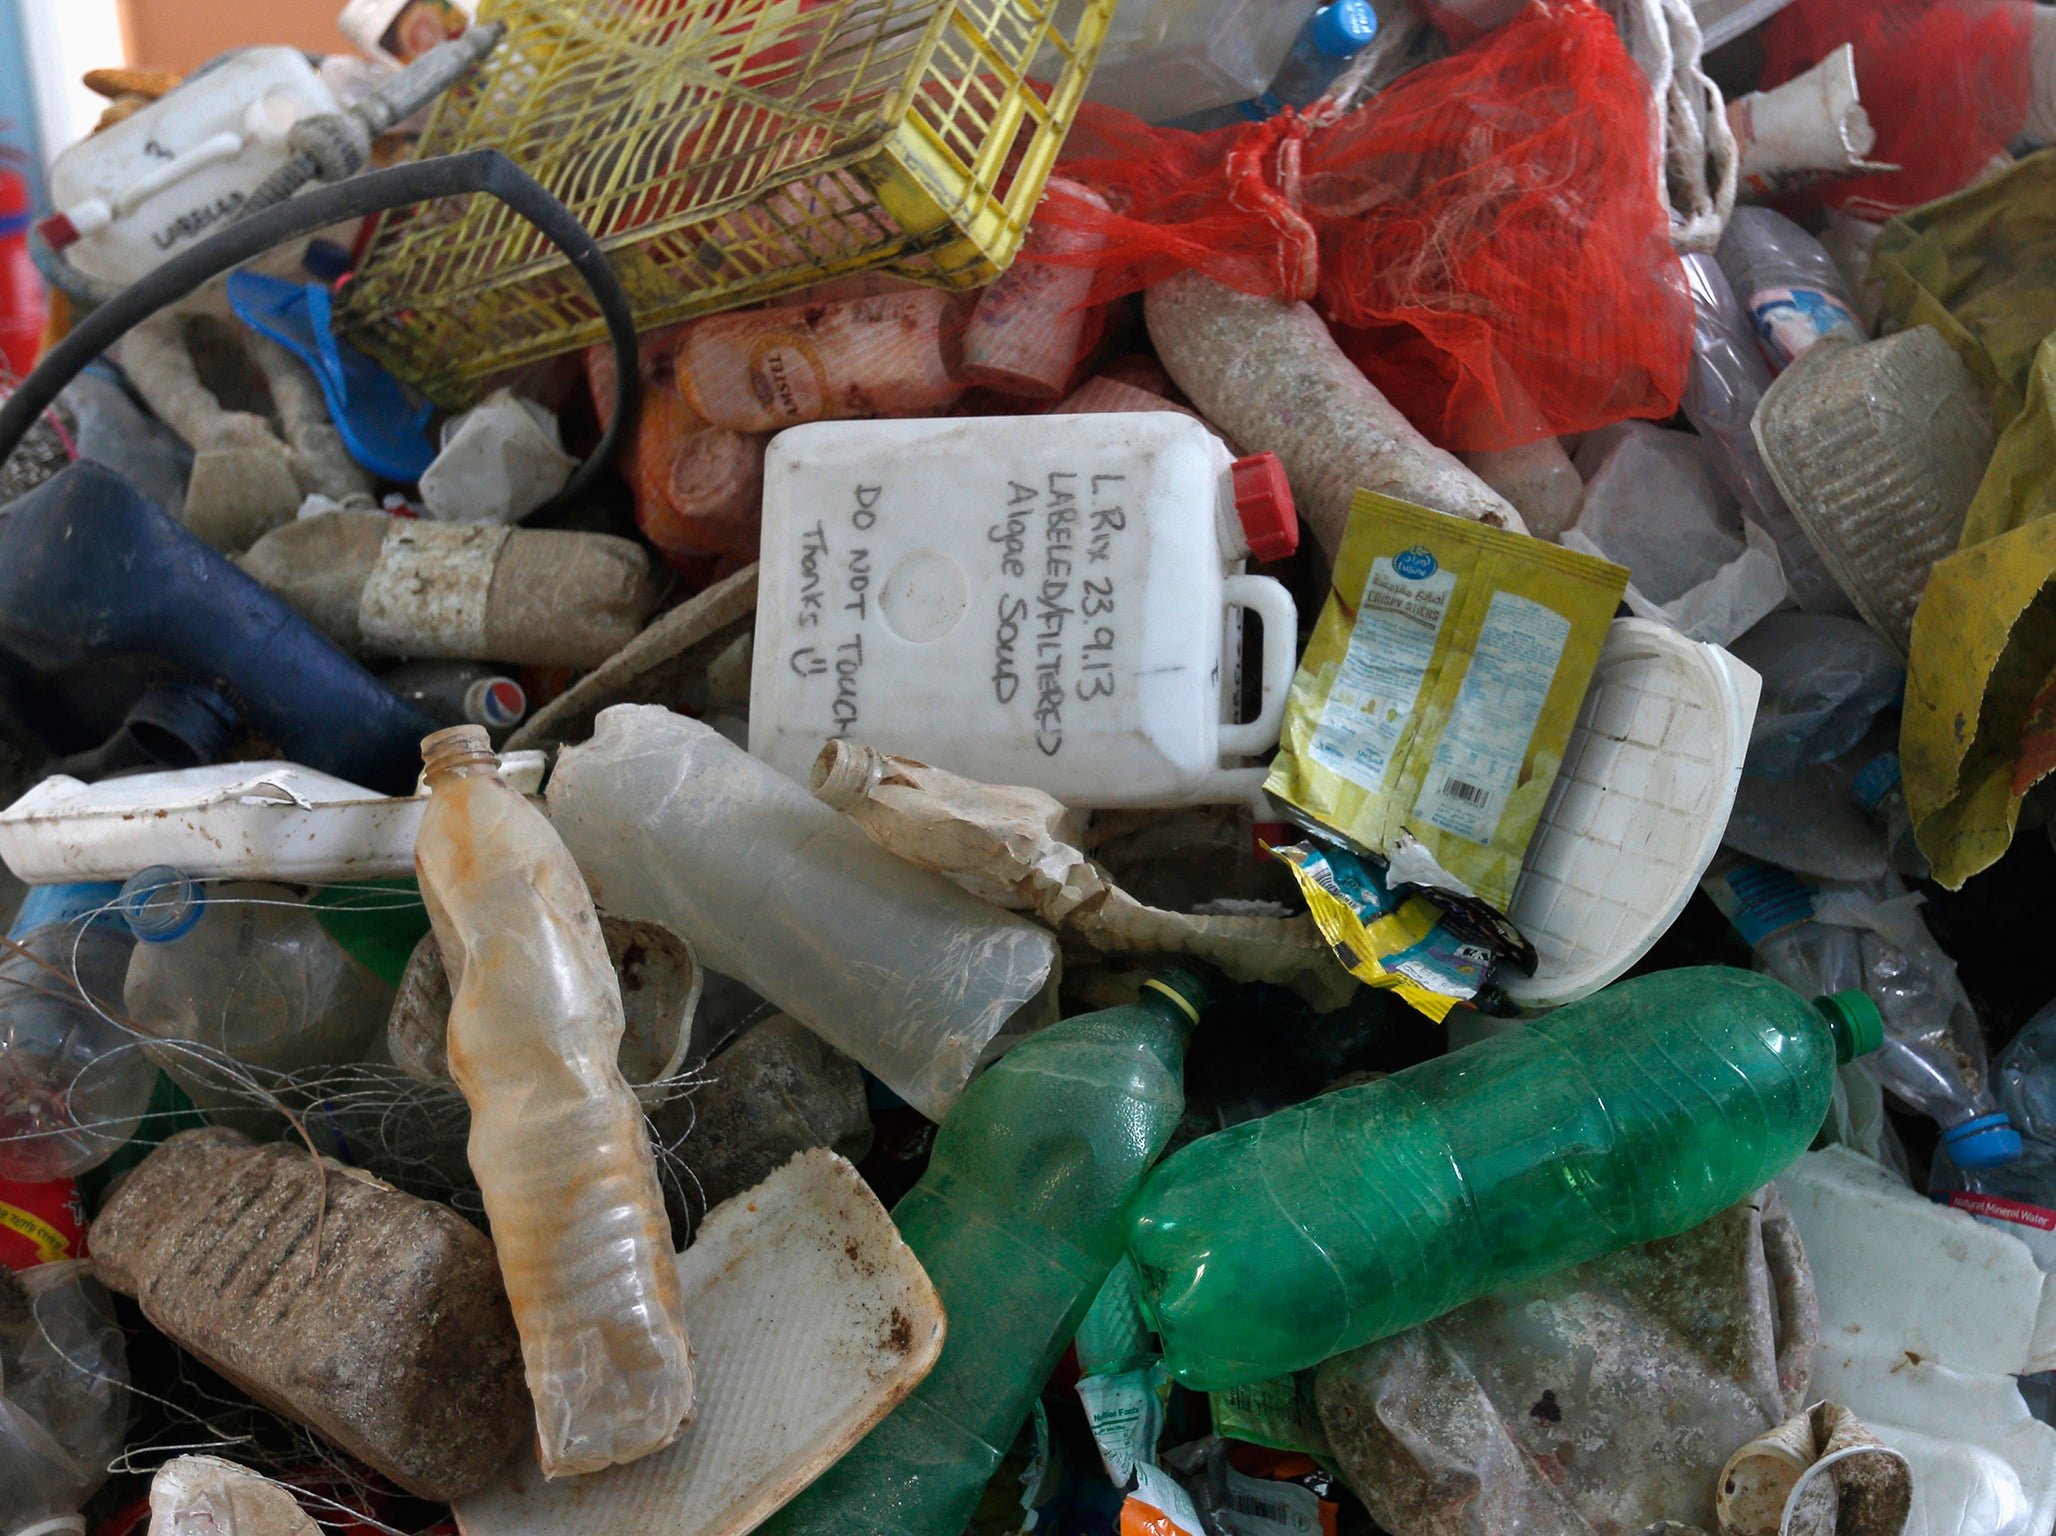 Plastic waste is seen at the plastic waste exhibition "Sea, The Last Leg" in down town Amman November 19, 2014